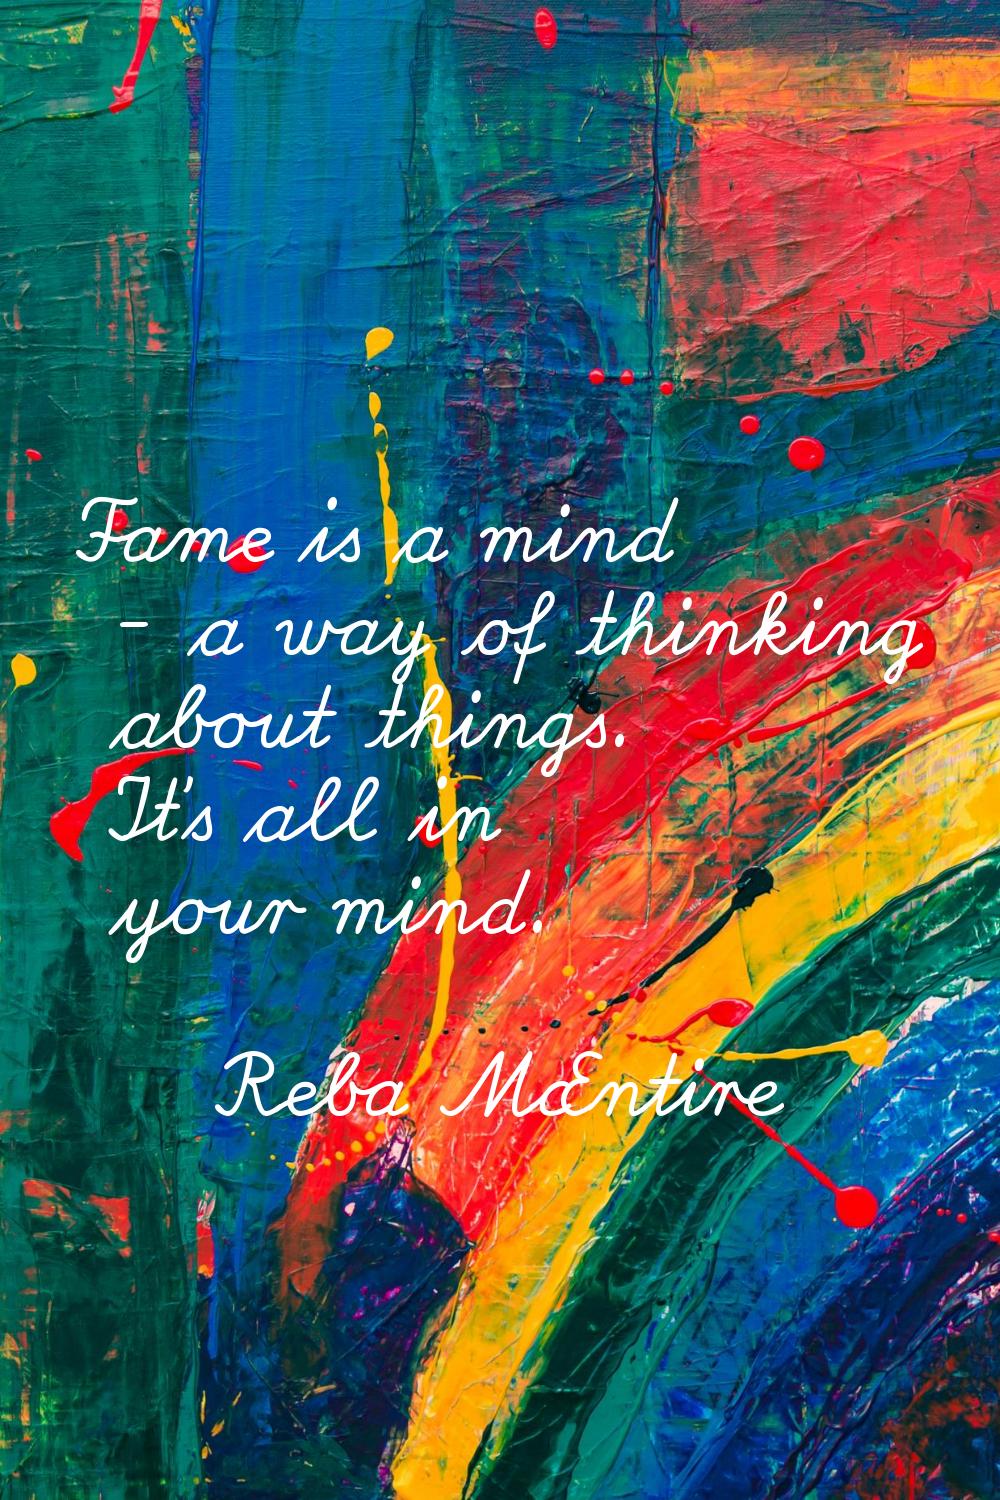 Fame is a mind - a way of thinking about things. It's all in your mind.